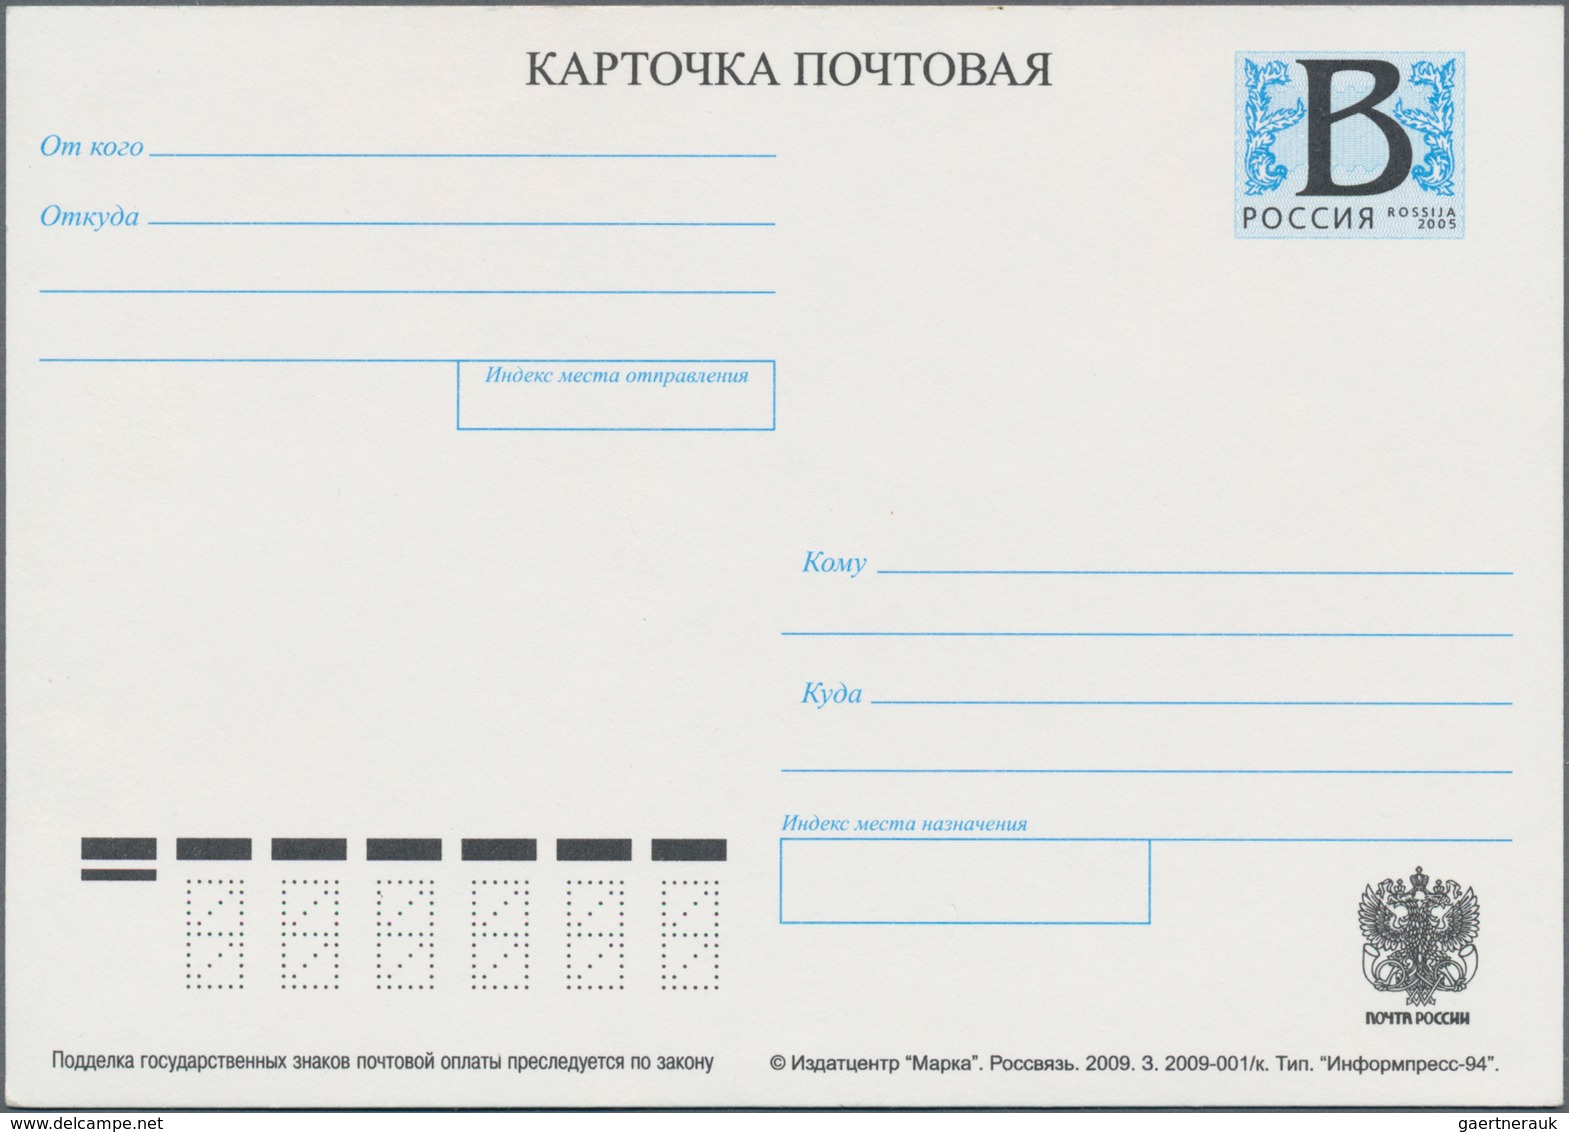 Russland - Ganzsachen: 1992/2012 Ca. 390 Exclusively Unused Pictured Postal Stationery Cards, Large - Entiers Postaux